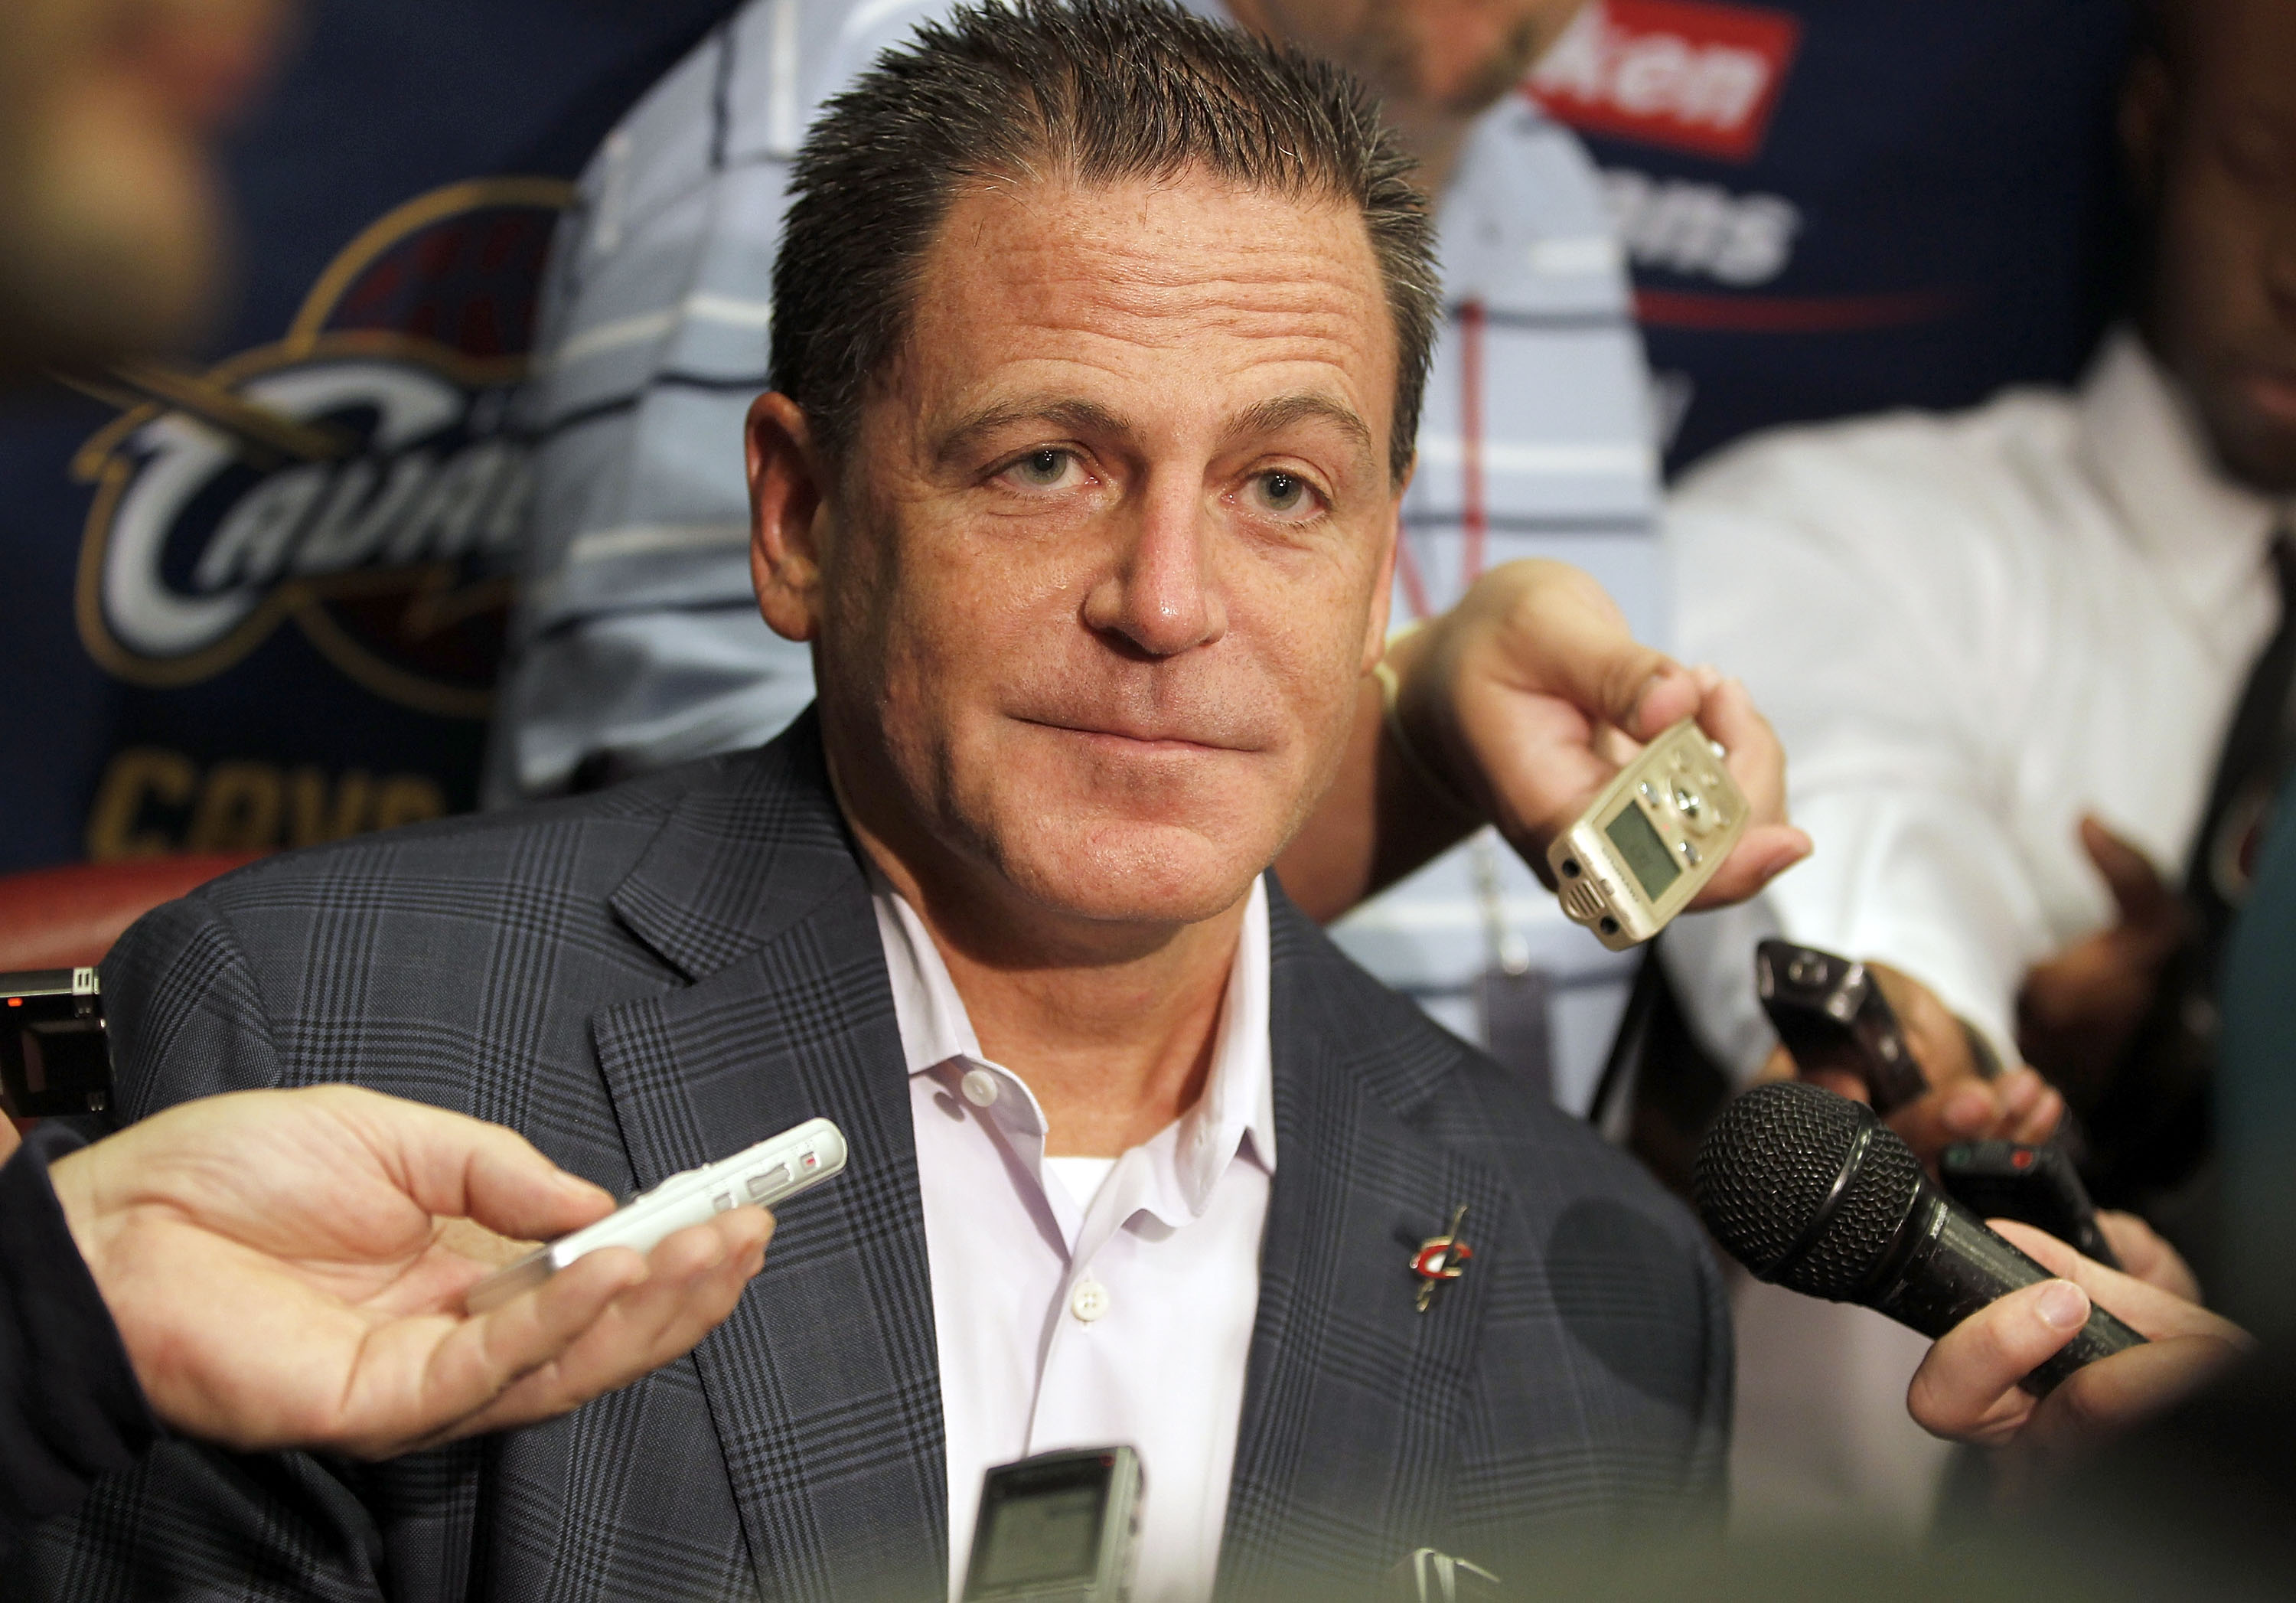 CLEVELAND - OCTOBER 27:  Majority owner Dan Gilbert of the Cleveland Cavaliers talks to the media prior to playing the Boston Celtics in the Cavaliers 2010 home opner at Quicken Loans Arena on October 27, 2010 in Cleveland, Ohio.  NOTE TO USER: User expre